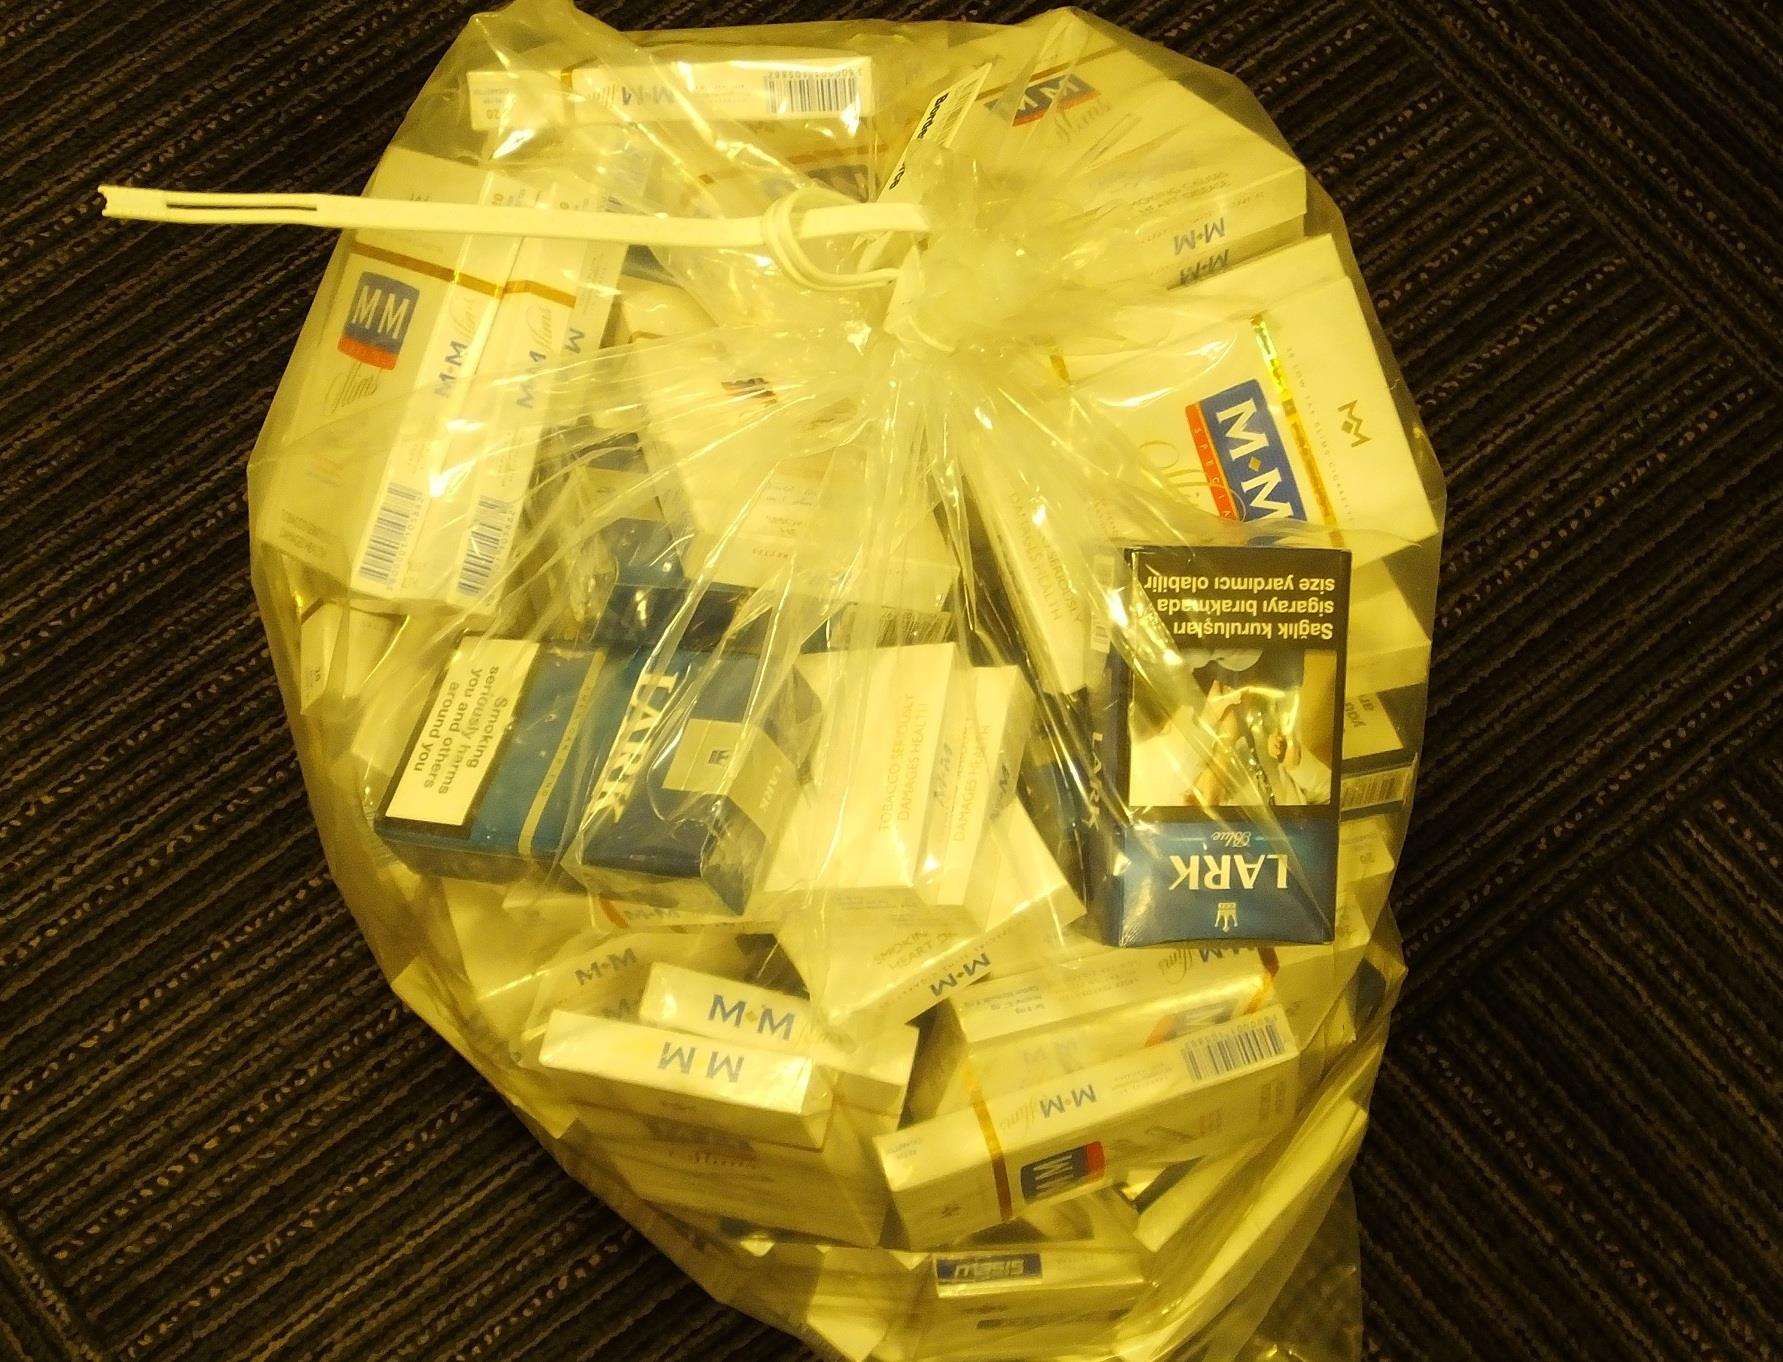 One of the bags of cigarettes found (6368094)